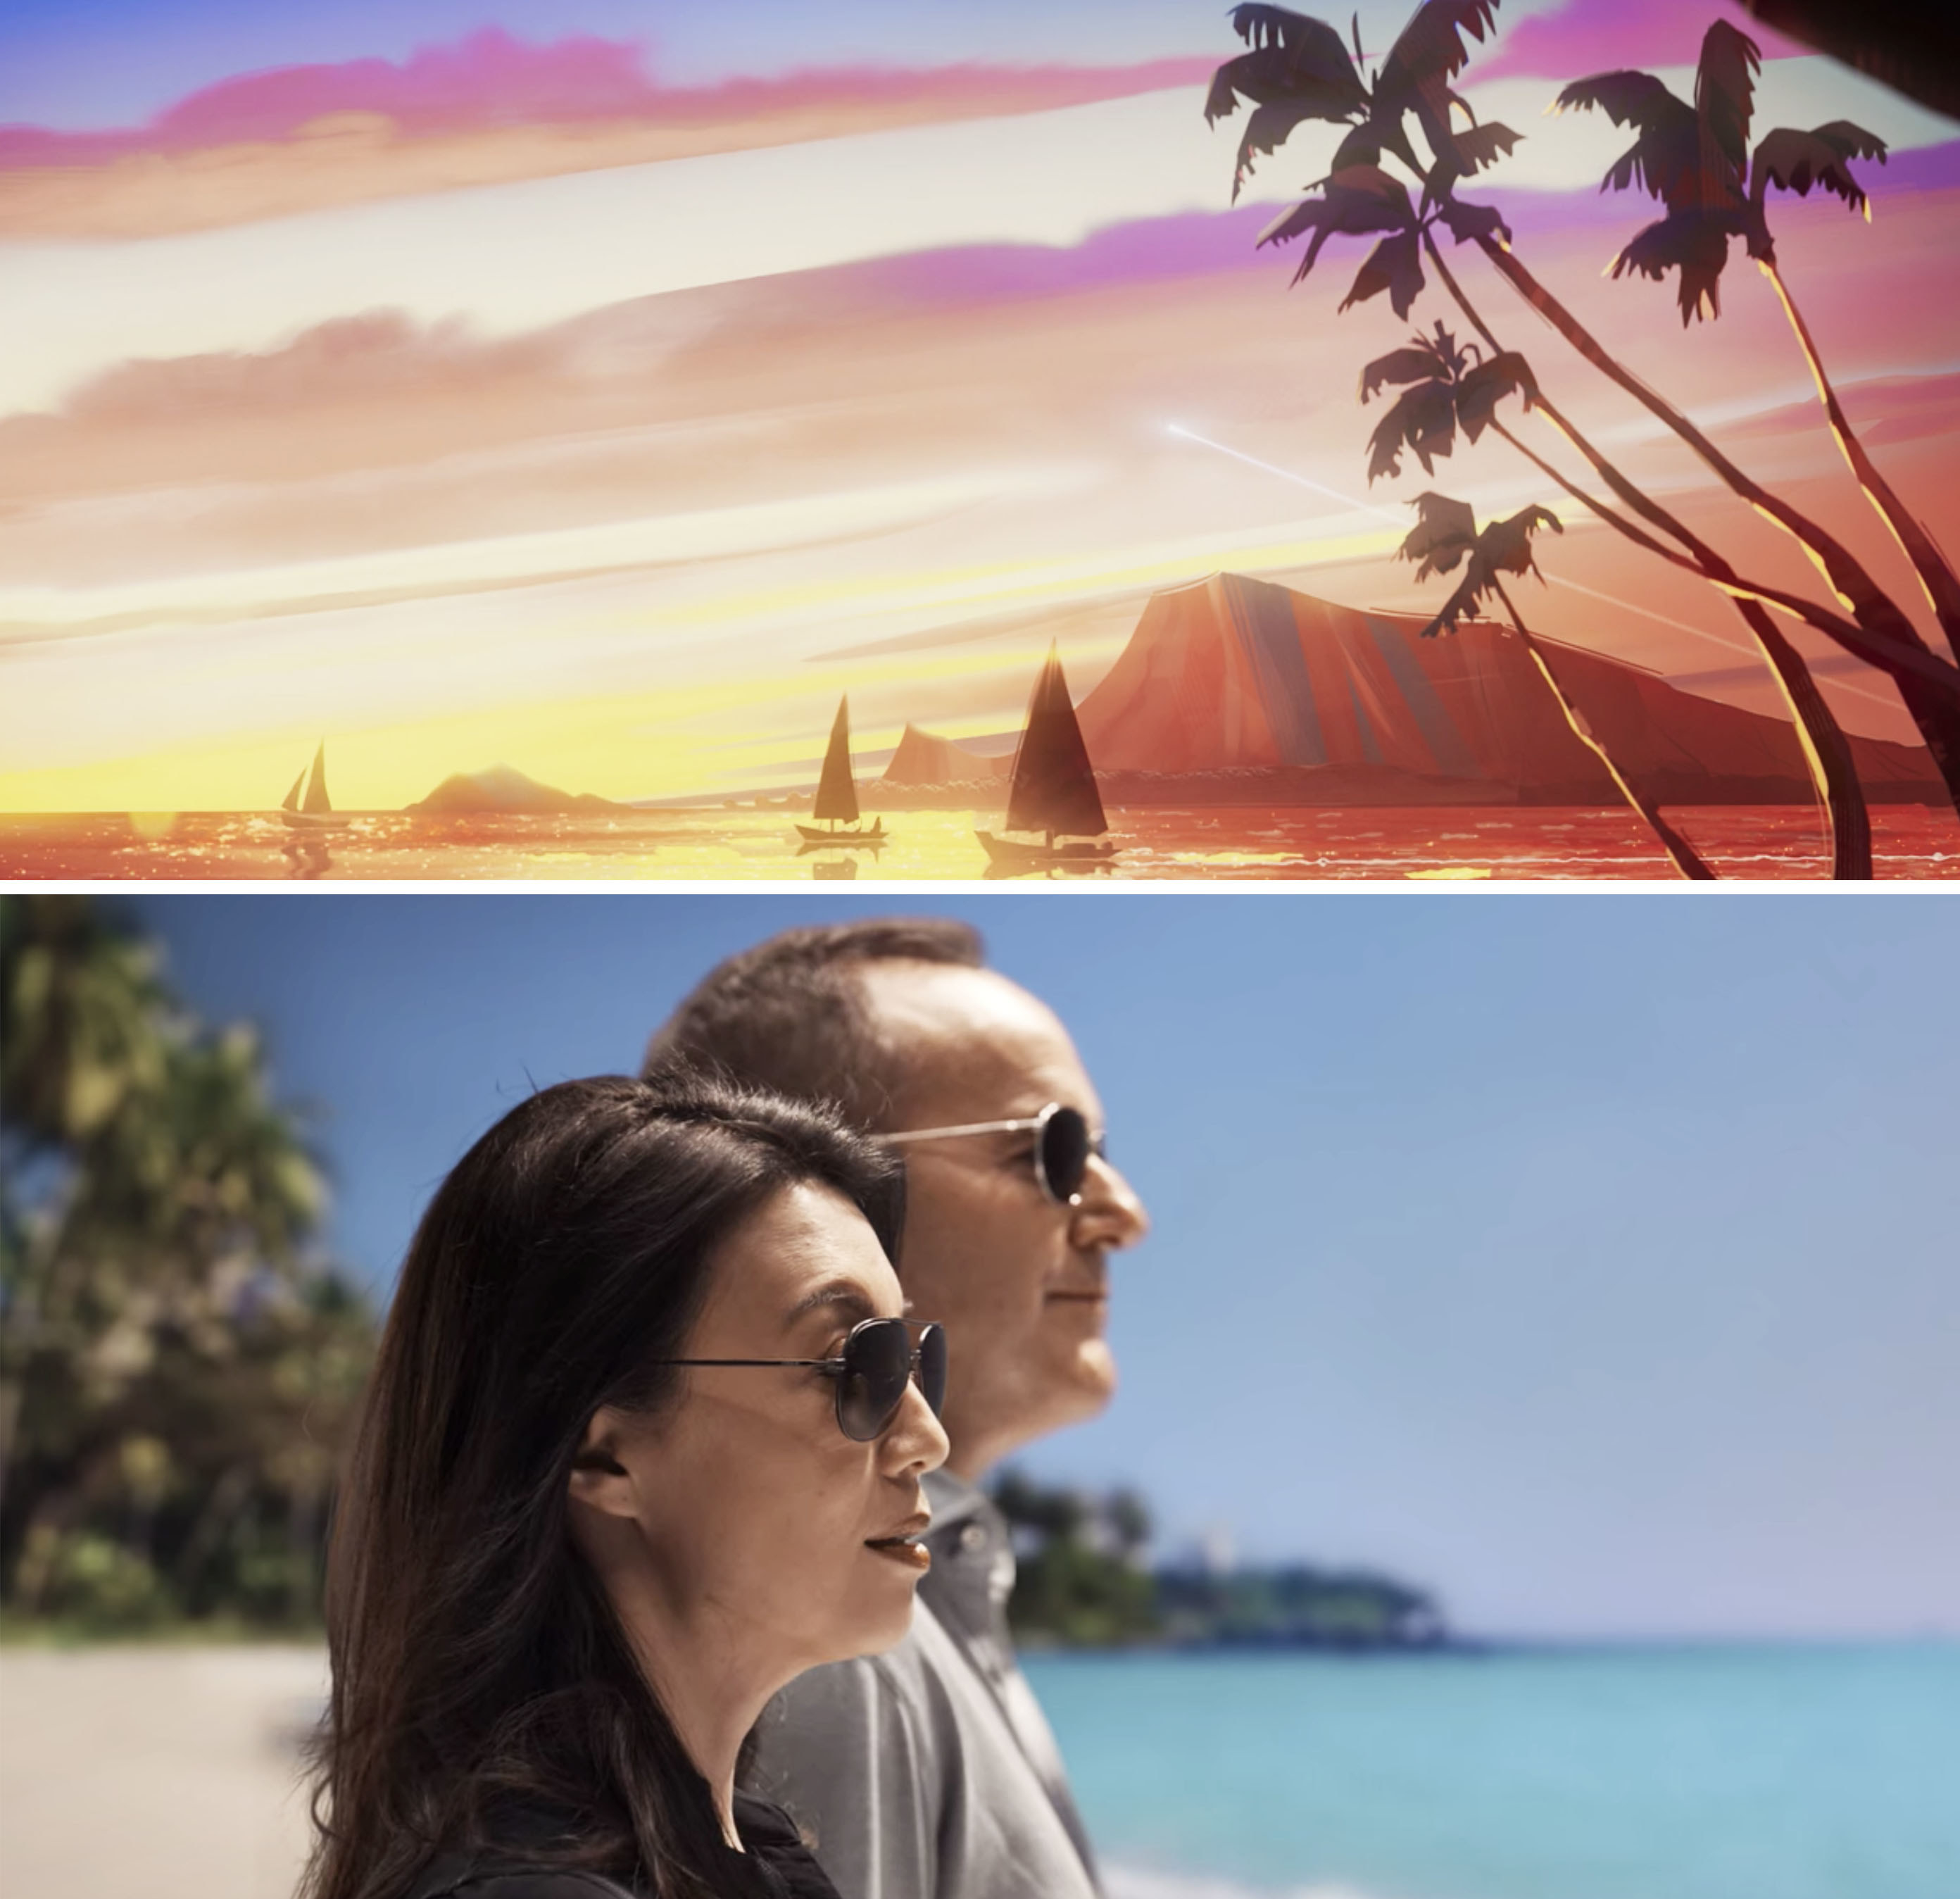 A beautiful island at sunset vs May and Coulson standing on a beach